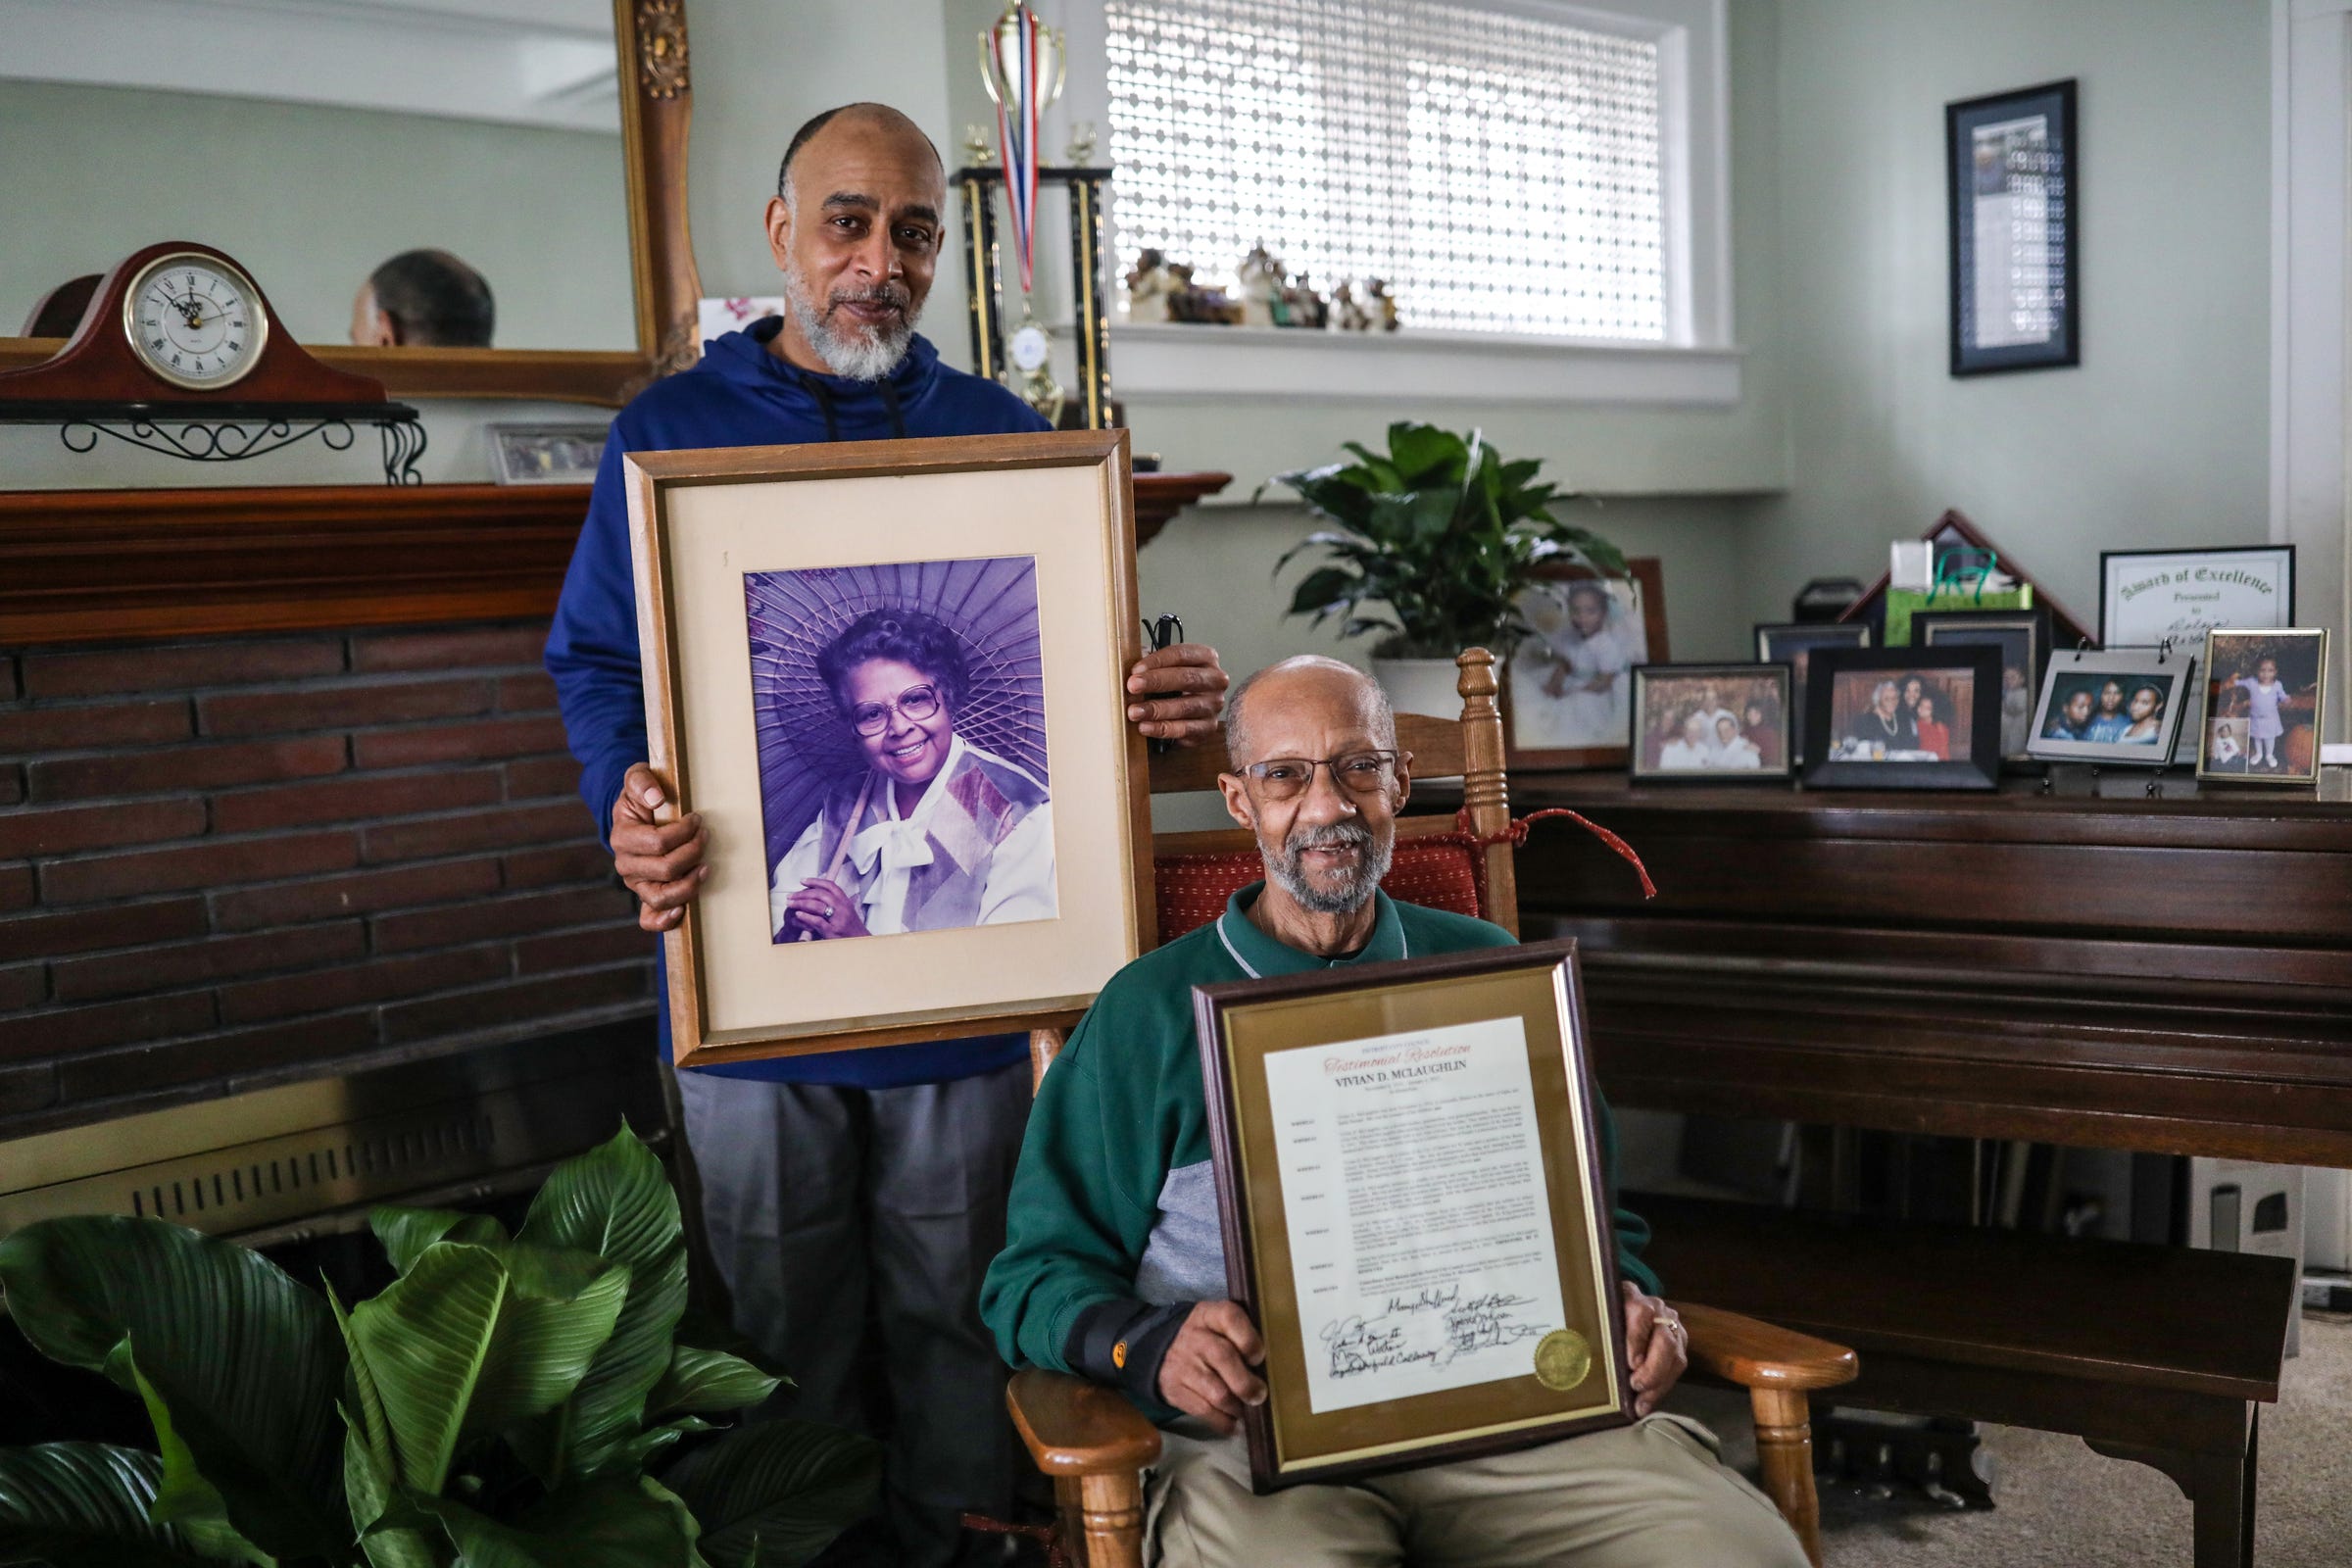 Adrian Ponder, 73, of Royal Oak, right, holds up Detroit City Council proclamation for his late Aunt Vivan McLaughlin,  sitting in her rocking chair next to her grandson Jonathan McLaughlin, who took care of her for 15 years, at her home in Detroit on Tuesday, Feb. 8, 2022. Ponder retired from the Detroit Police Department in 1986 after witnessing his partner being shot and killed on duty. Suffering from Post Traumatic Stress Disorder, Ponder's relationship through the years with McLaughlin has helped him to heal to the point where he can perform his security job today at Wayne State University.